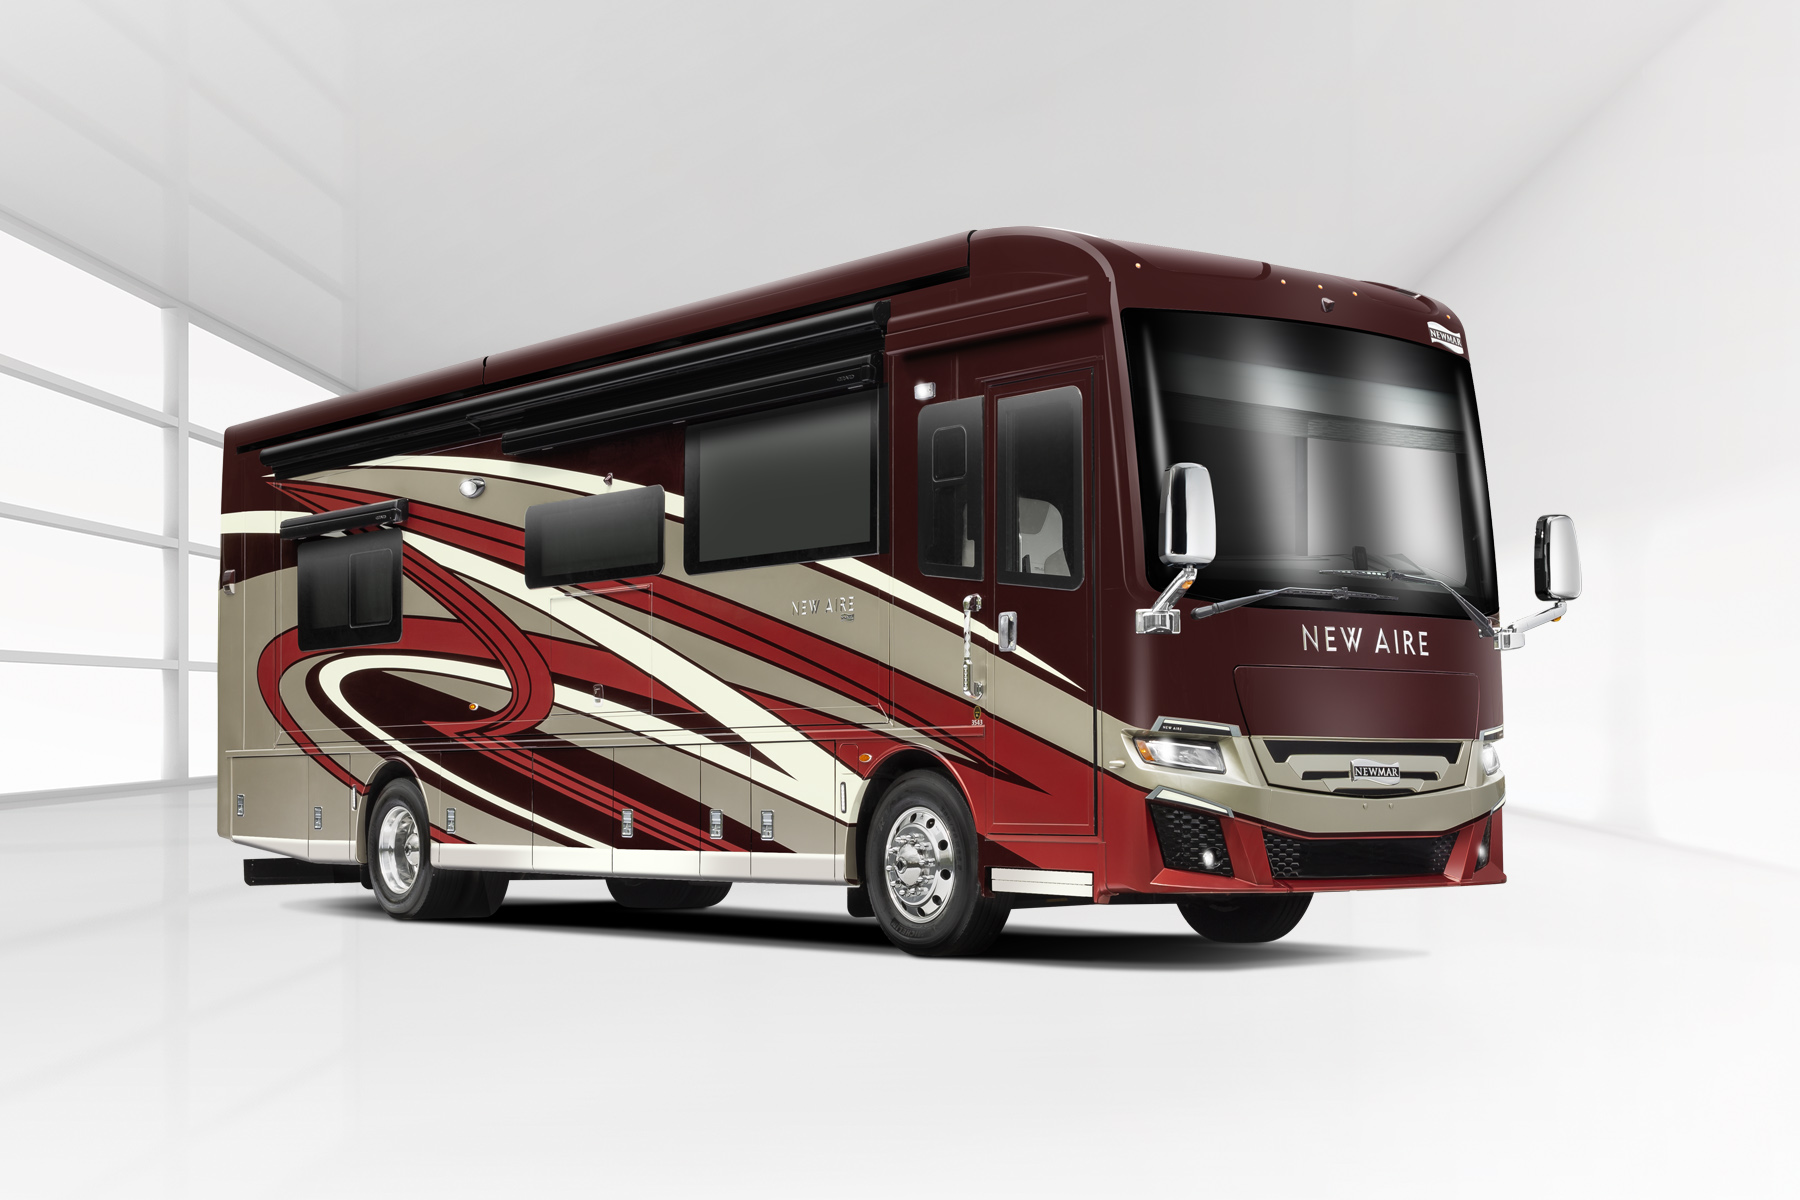 2022 New Aire motor coach gallery Newmar